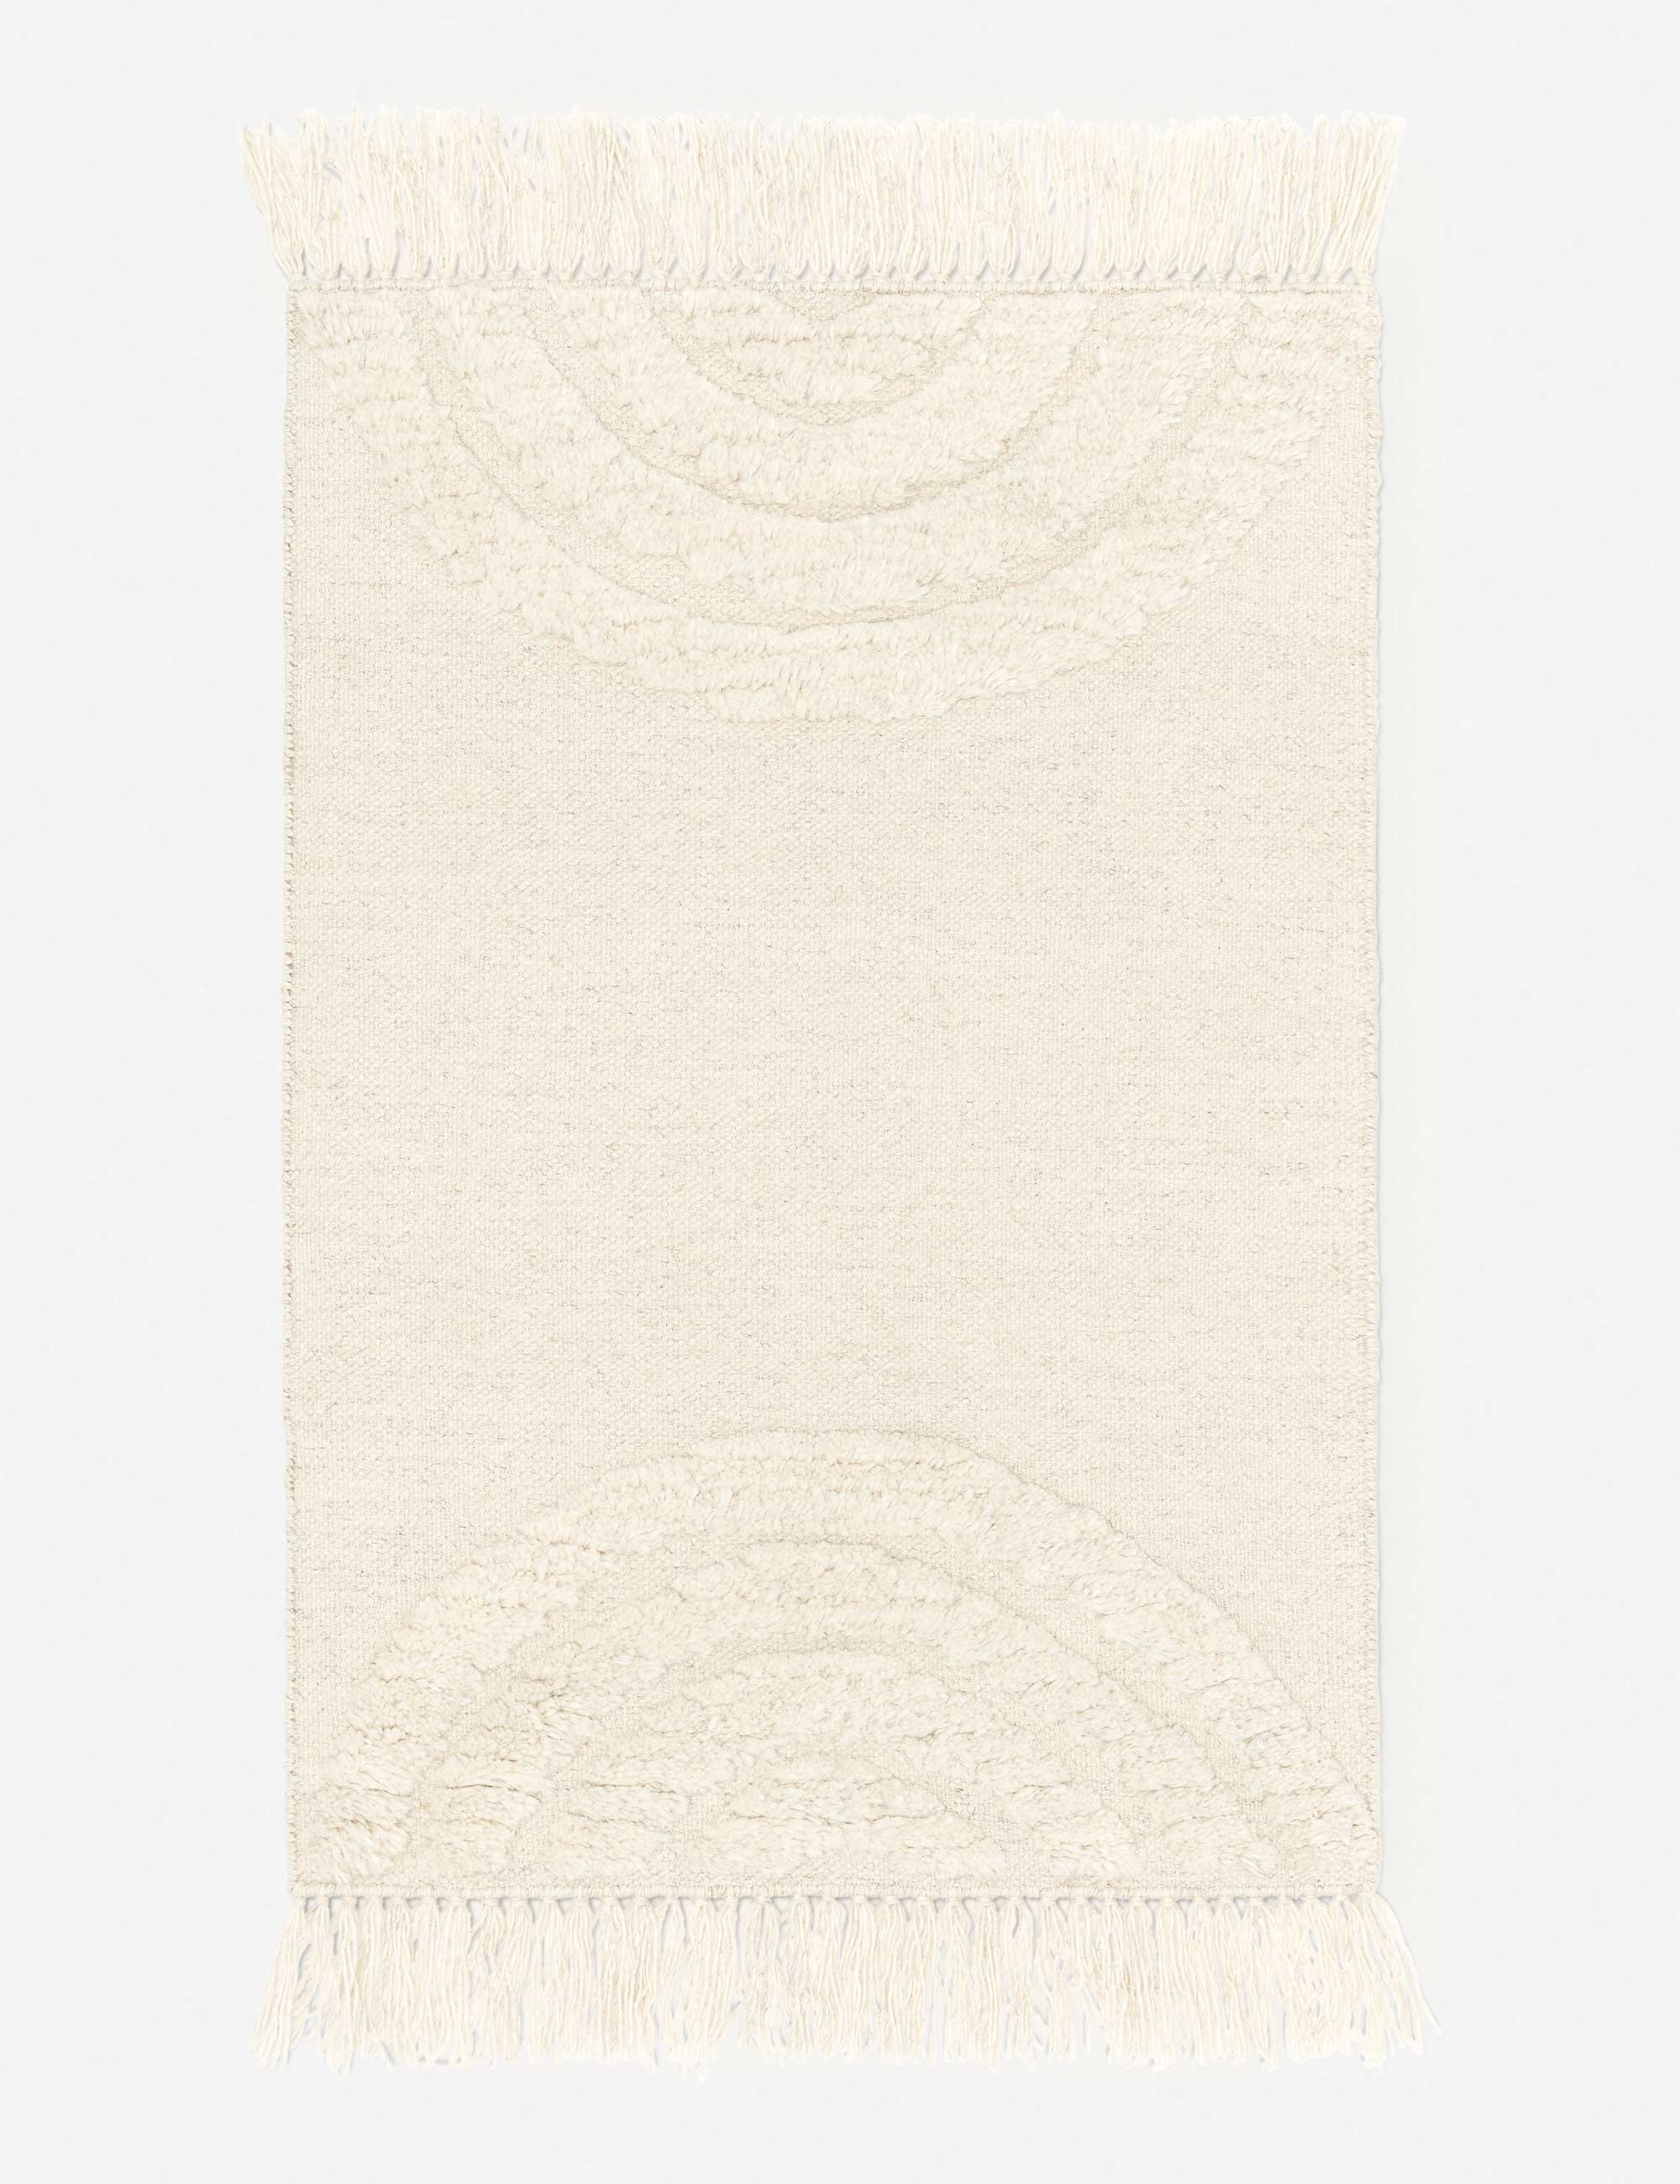 Arches Hand-Knotted Wool Rug by Sarah Sherman Samuel - Image 4